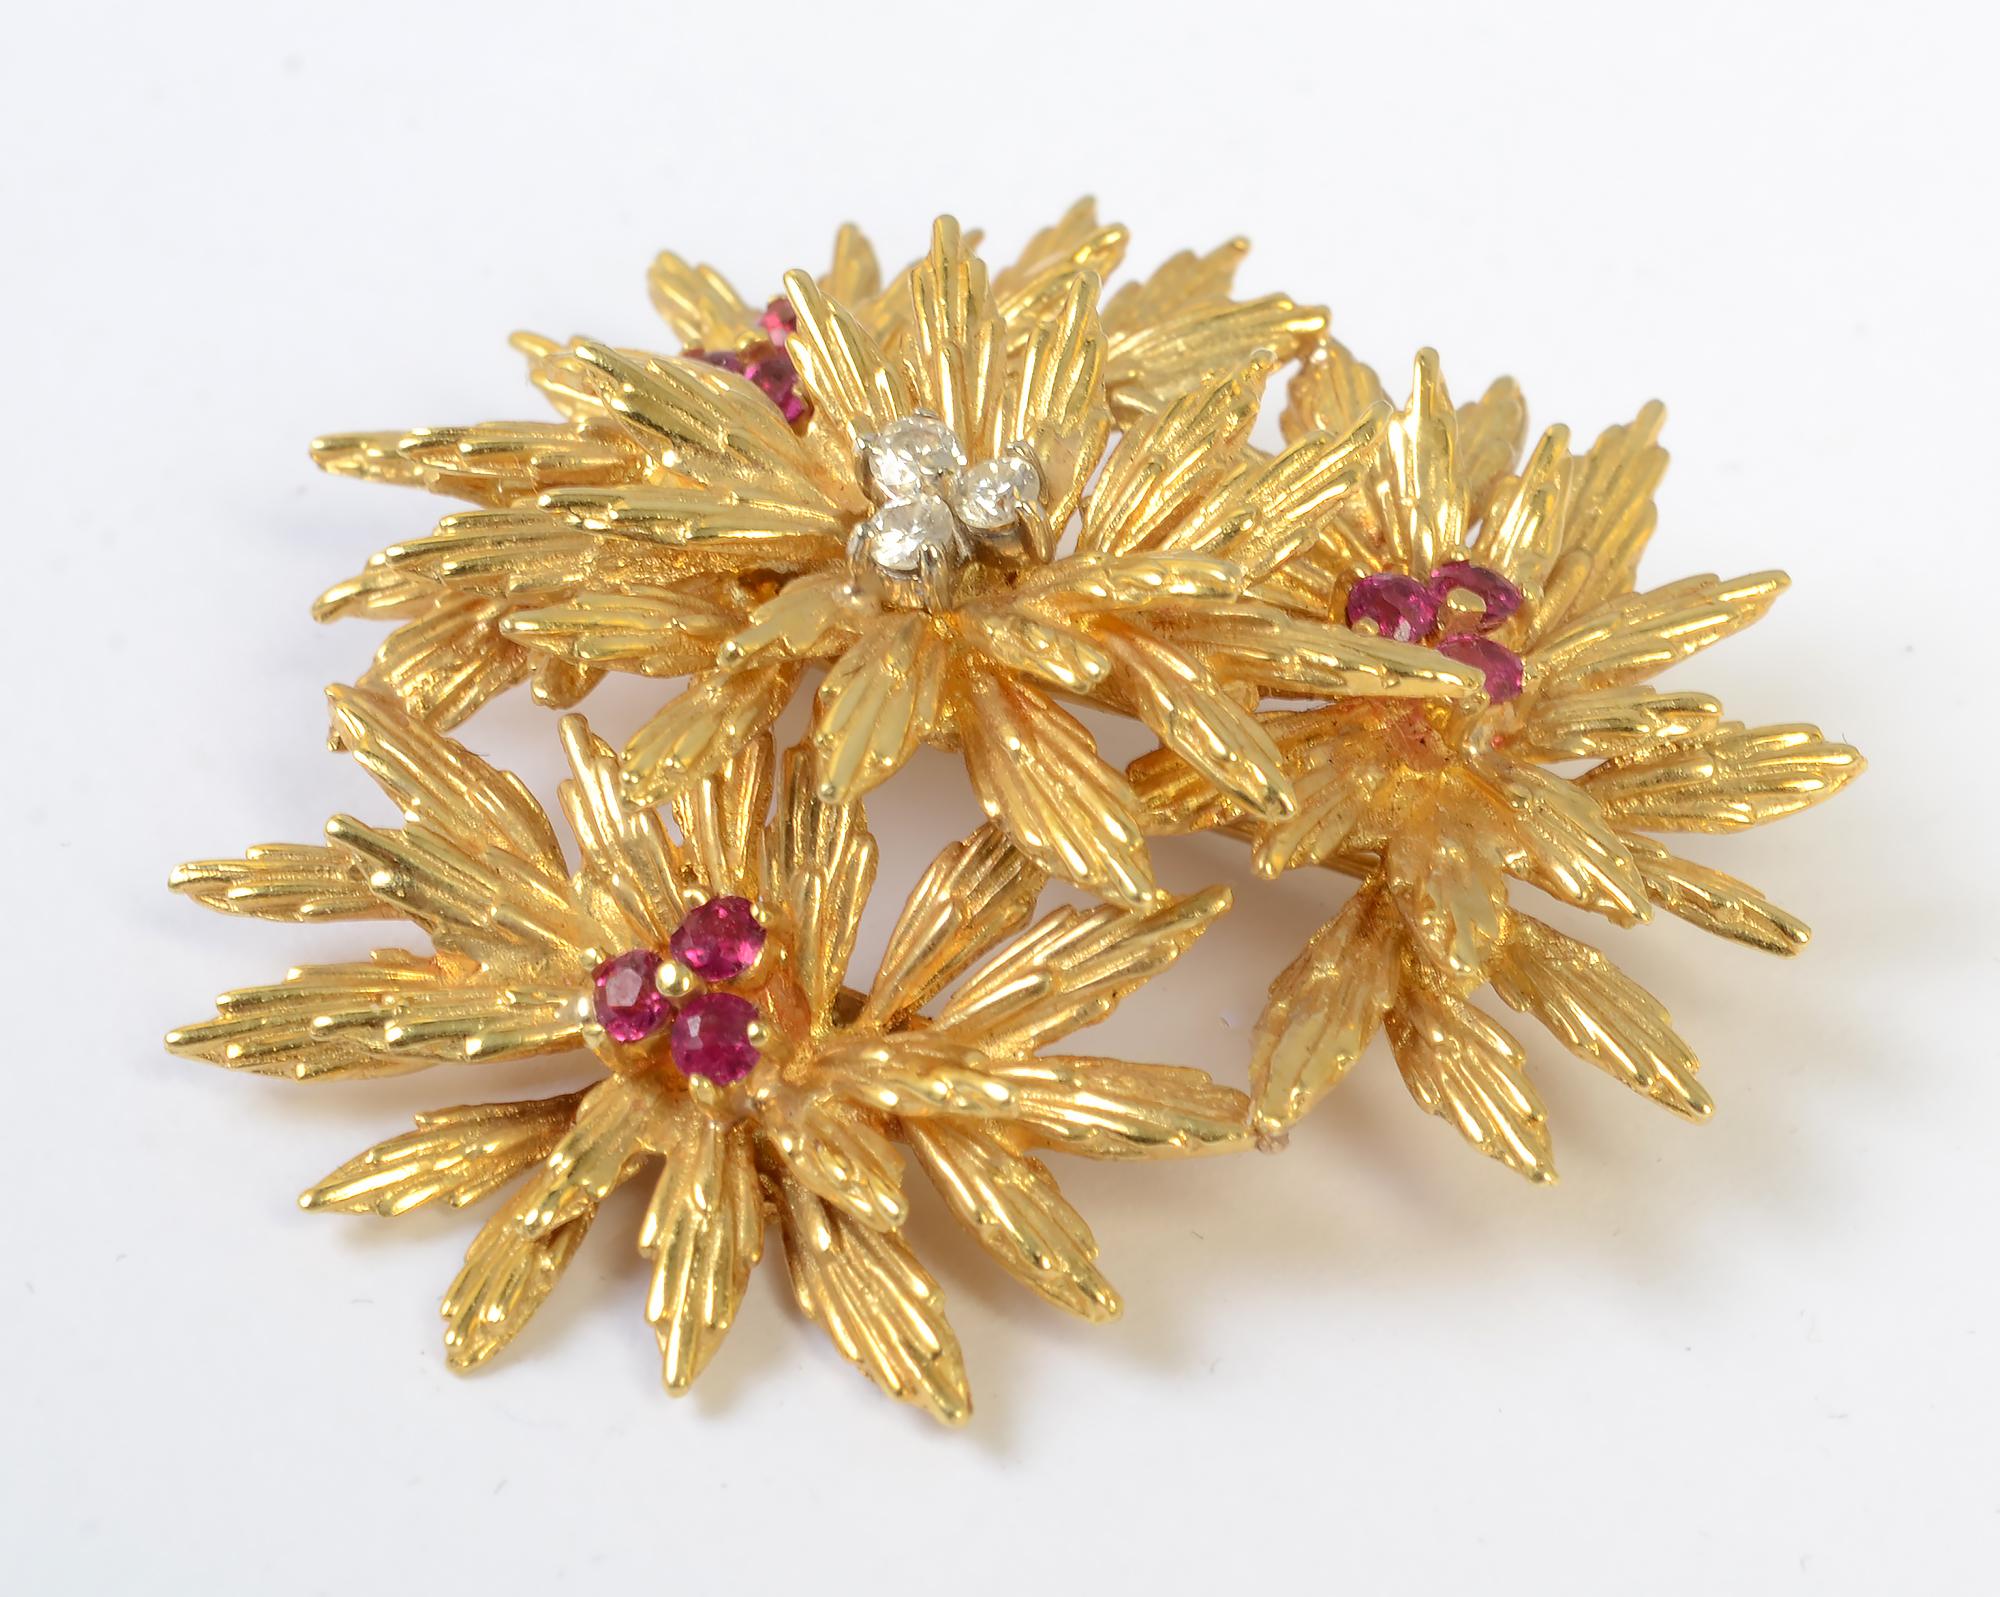 Wonderfully textured and three dimensional brooch by Tiffany with four spiked flowers. Three flowers on the bottom layer are centered with rubies. Overlapping them is a flower with three diamonds in the center.
The brooch is 1 3/4 inches in diameter